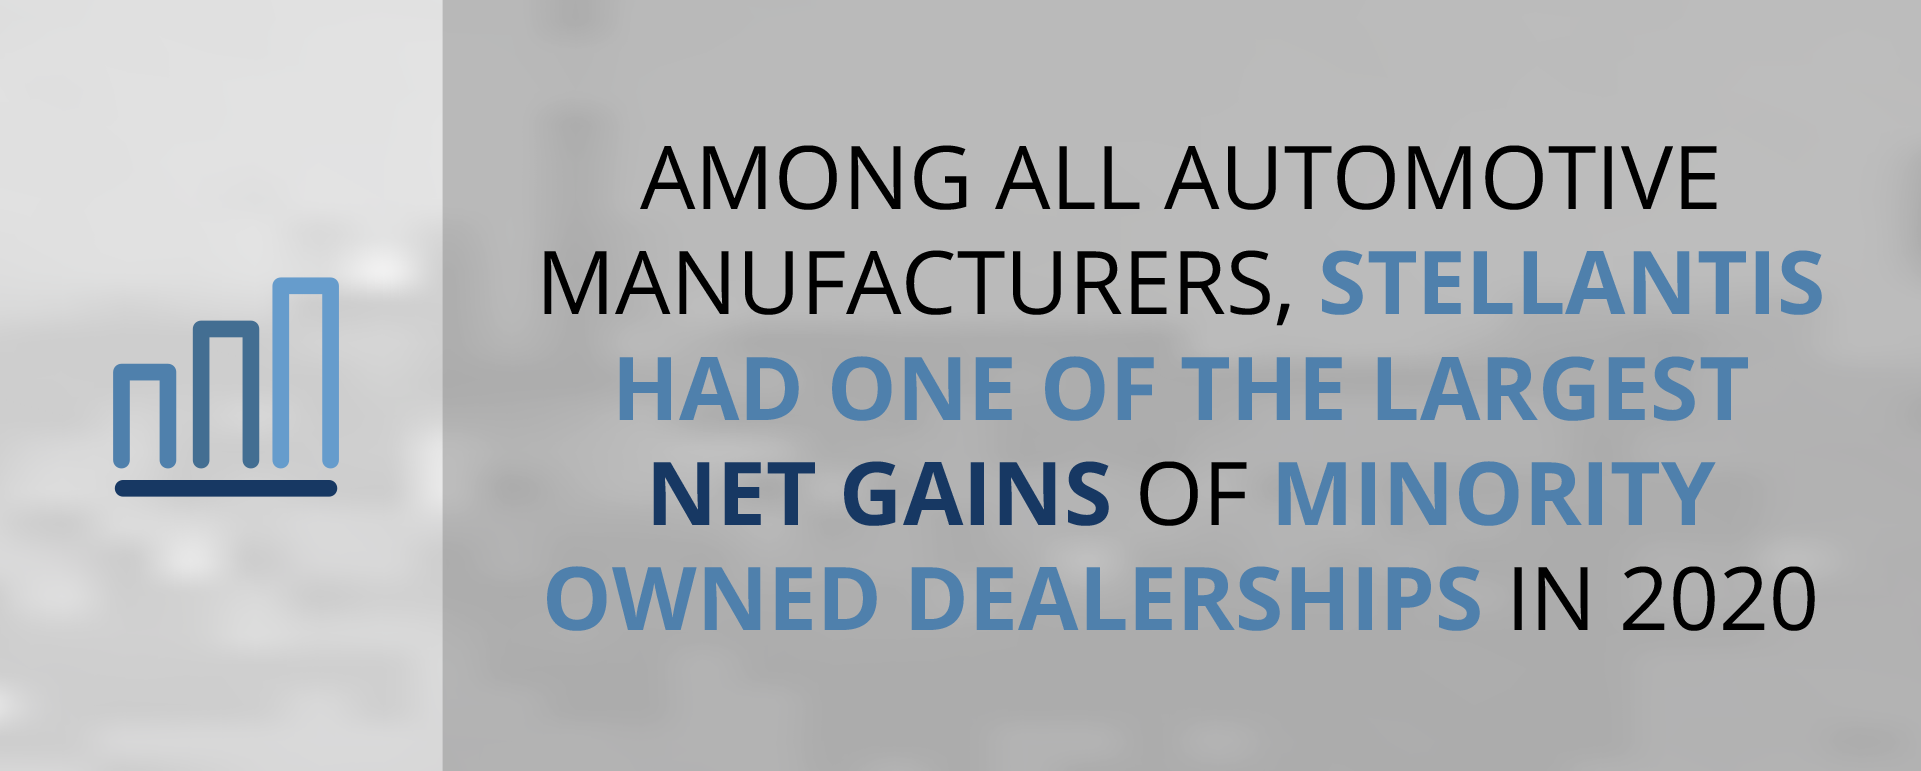 Among all automotive manufacturers, FCA US LLC had one of the largest net gains of minority owned dealerships in 2018